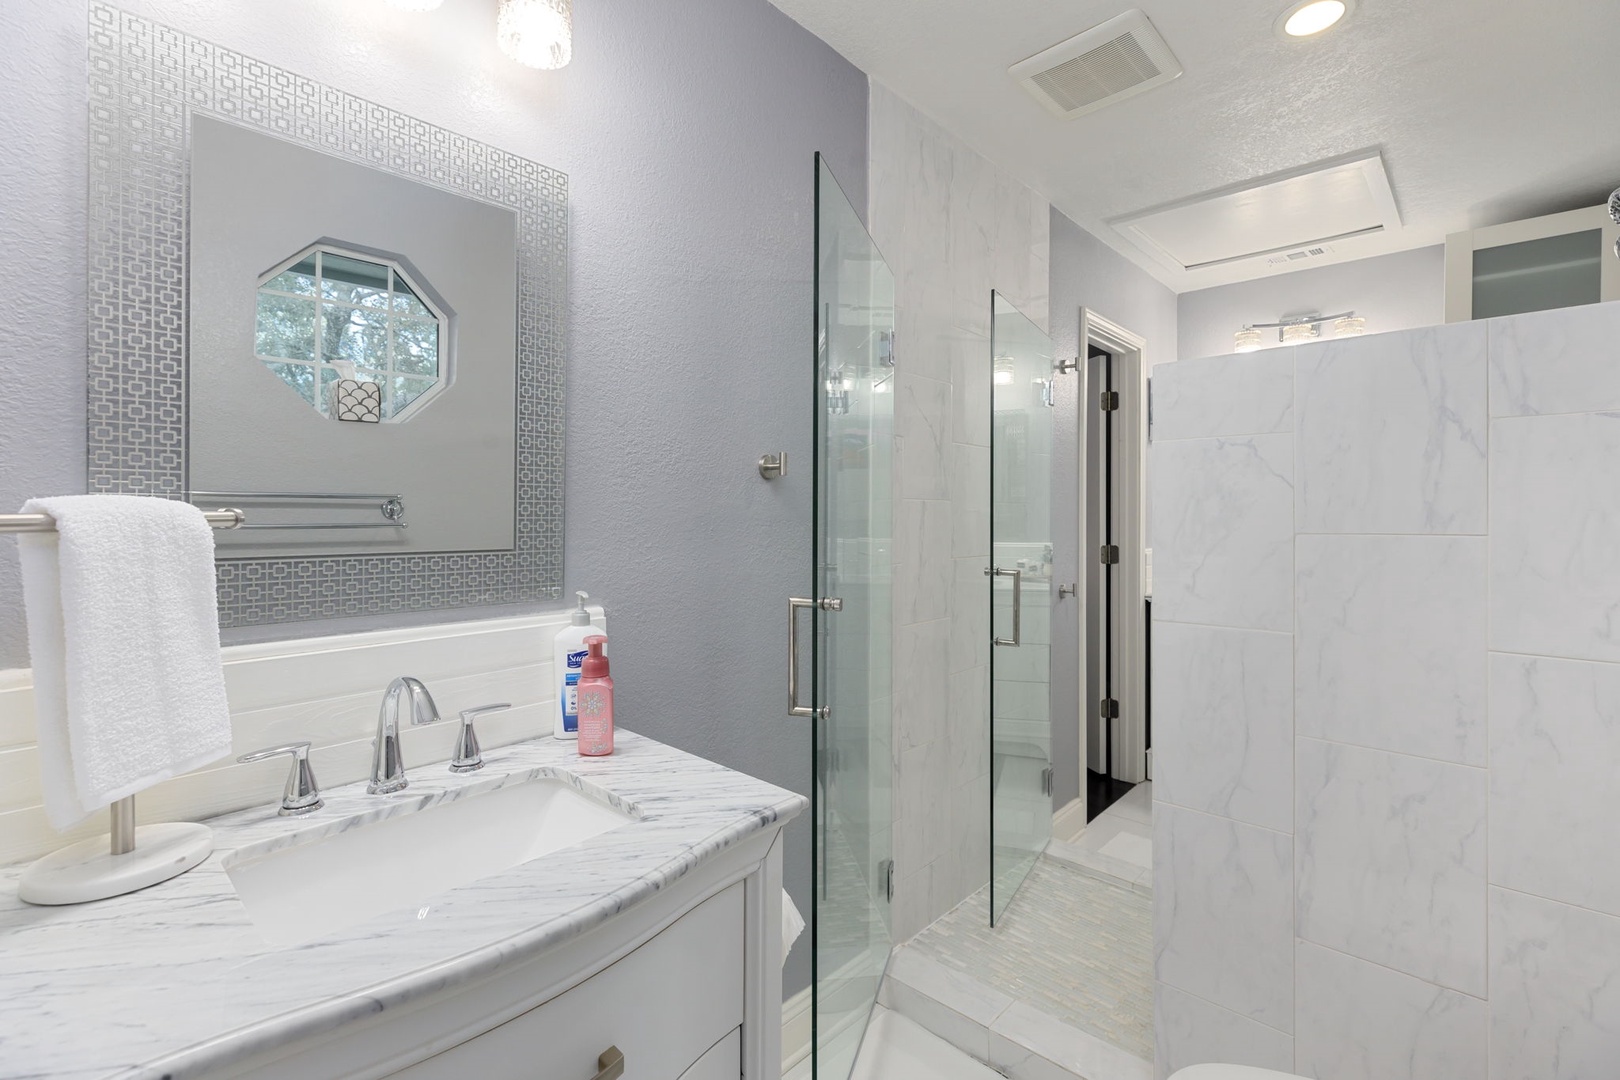 Private dual vanity areas & a glass walk-in shower await in this Jack & Jill bath